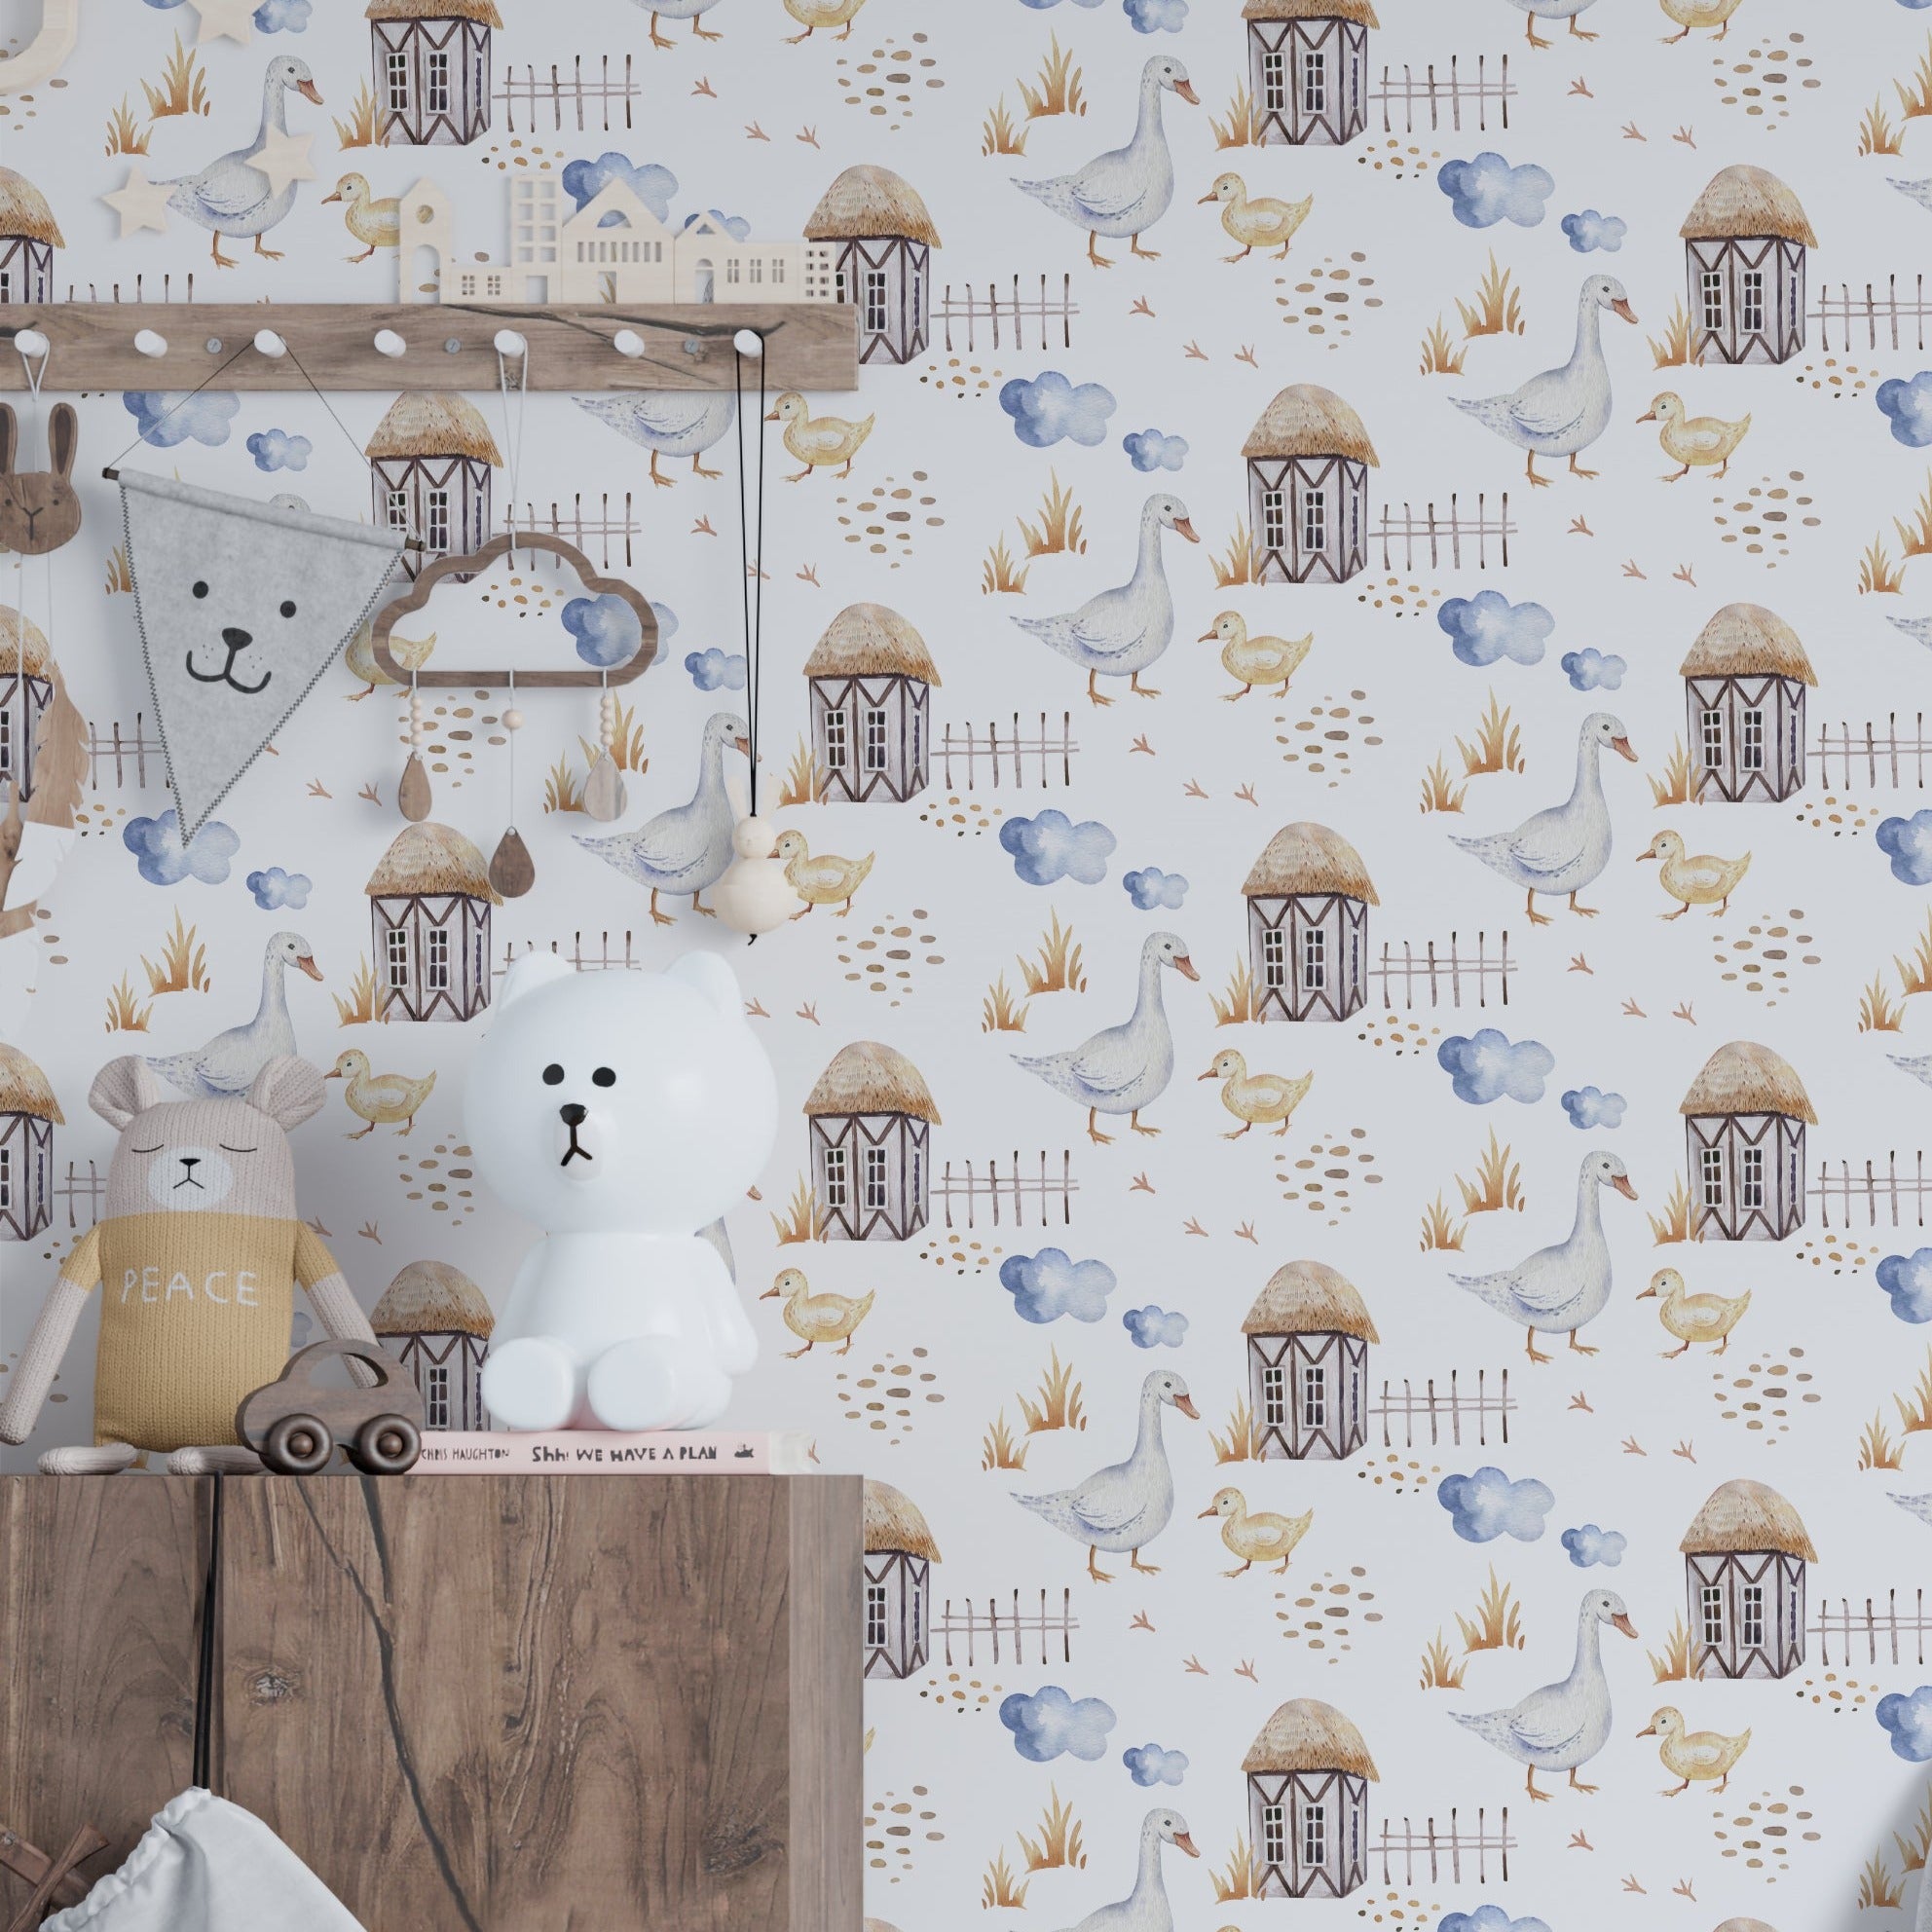 A child's nursery room decorated with 'Watercolor Farm Animals VI' wallpaper displaying a peaceful farm setting with geese and chicks near quaint farmhouses, enhancing the room's cozy and pastoral ambiance